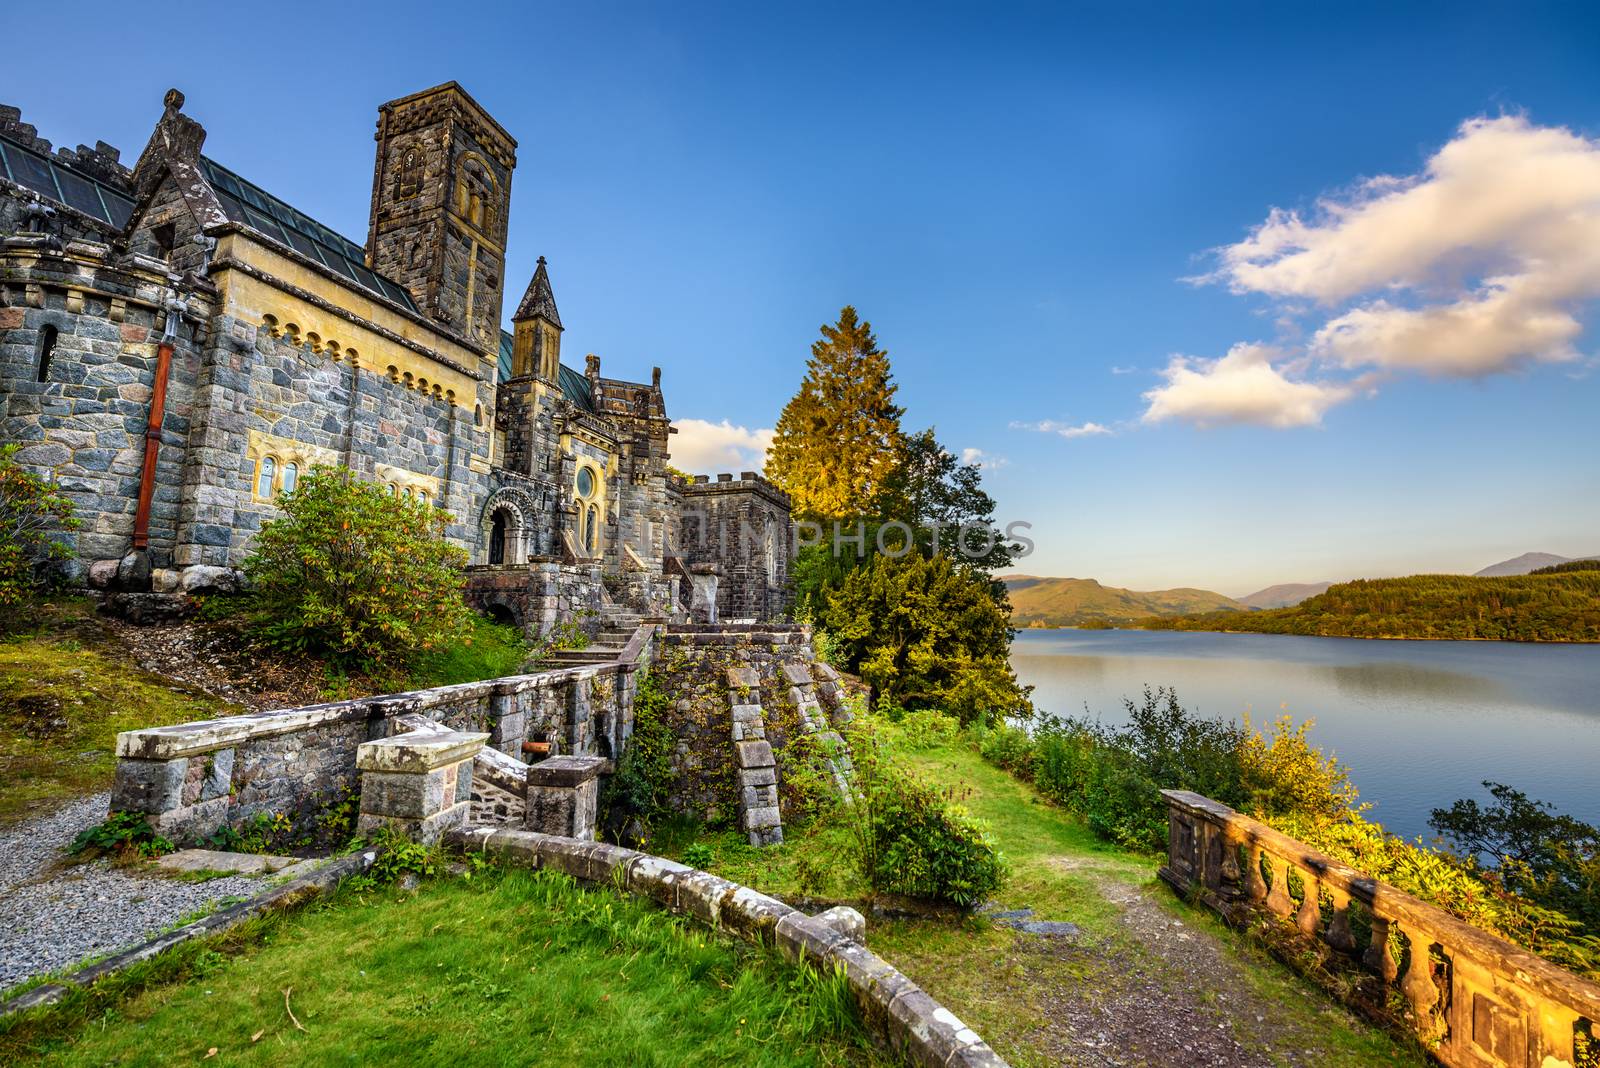 St Conans Kirk located in Loch Awe, Argyll and Bute, Scotland